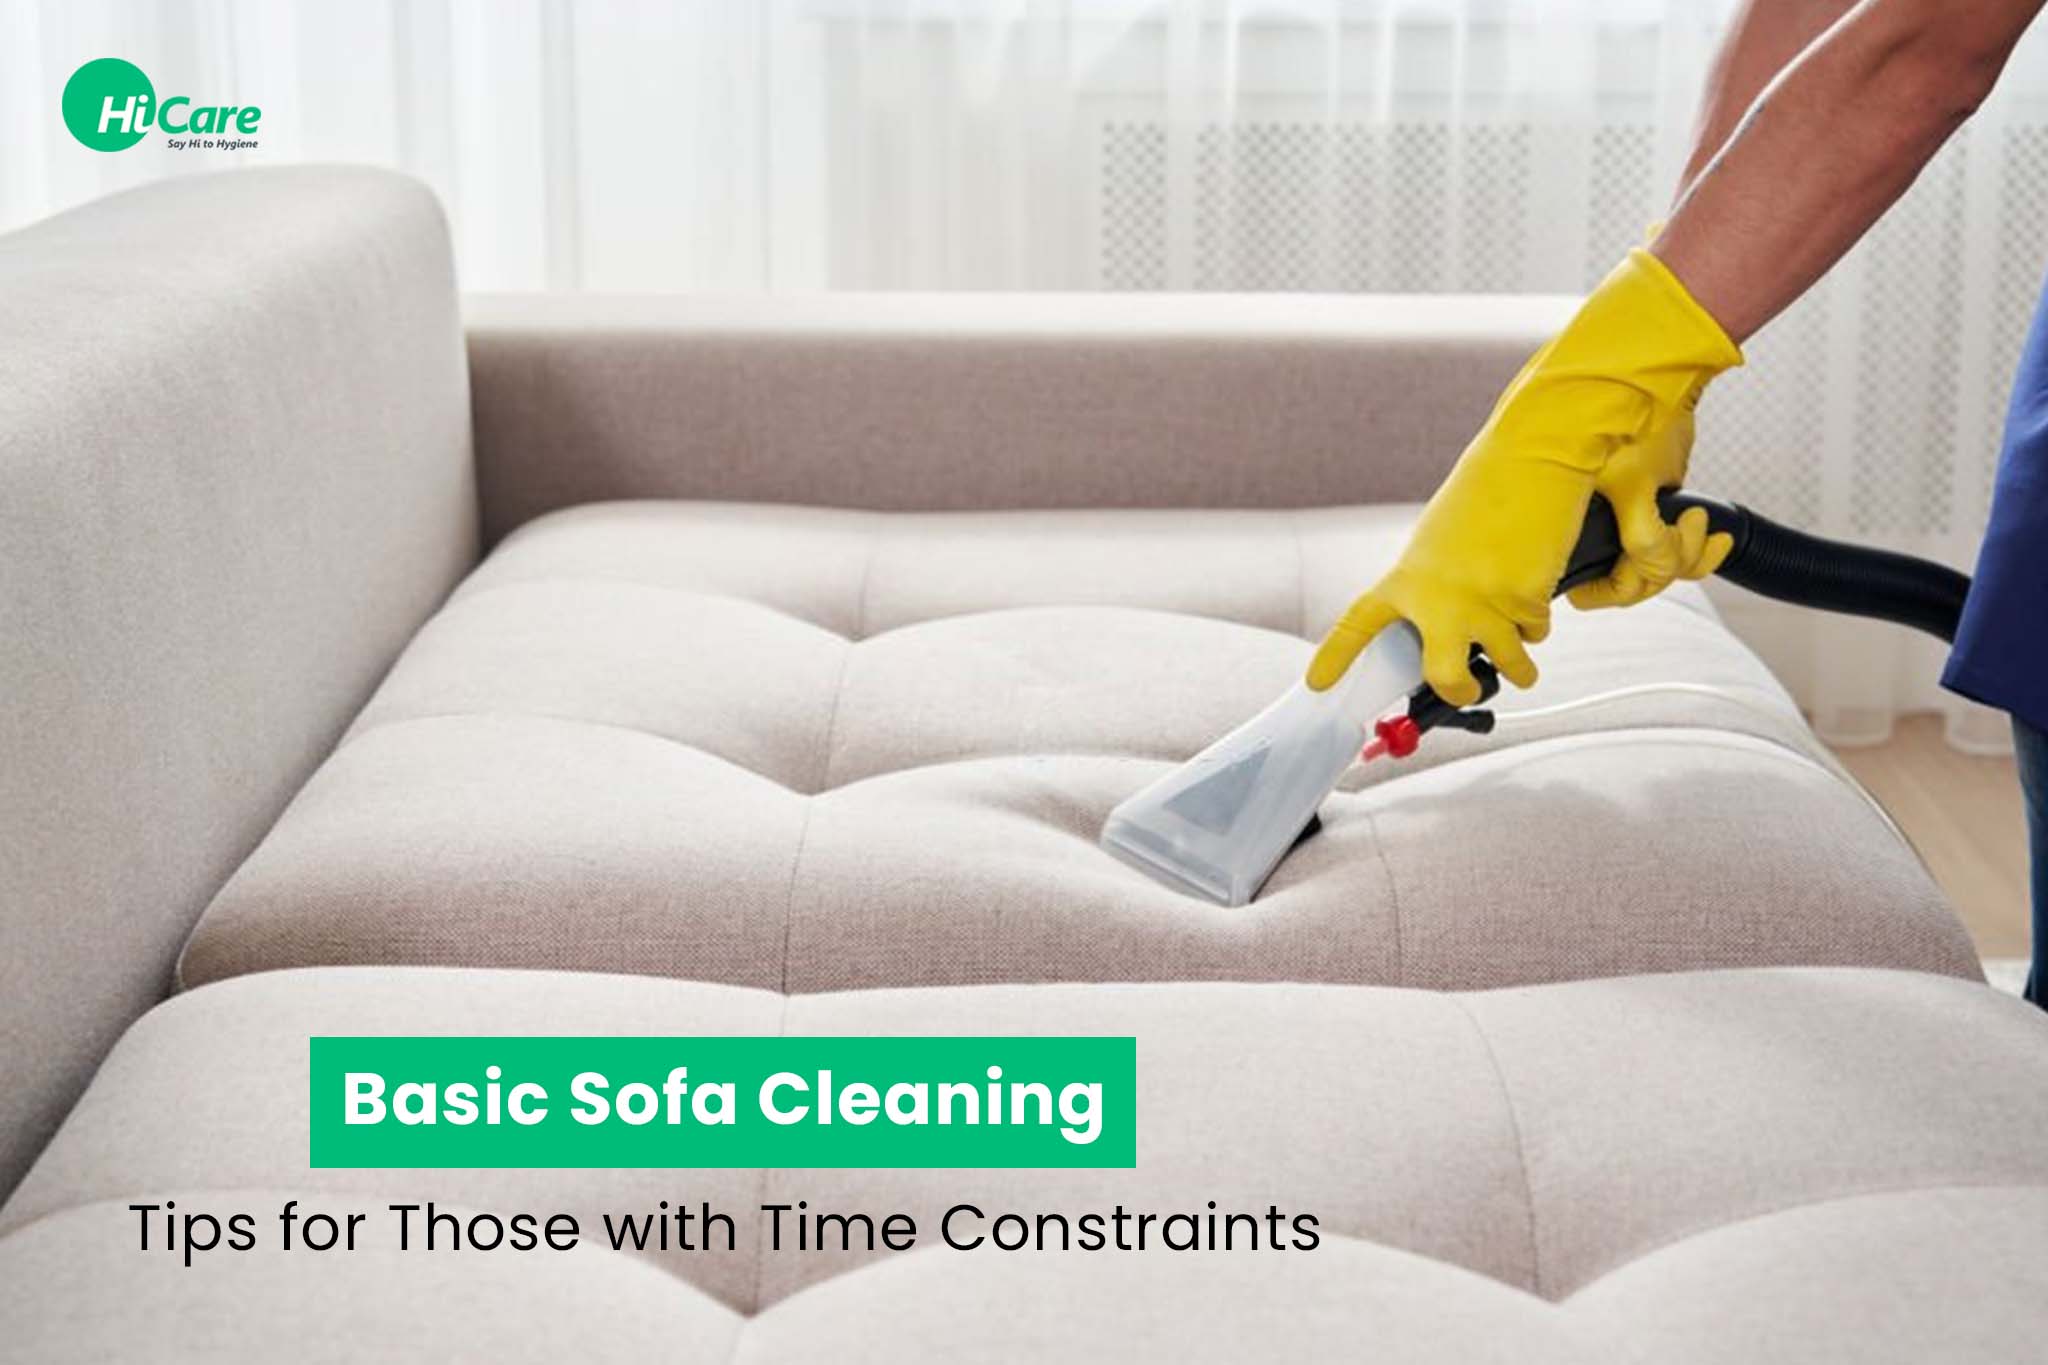 Basic Sofa Cleaning Tips for Those with Time Constraints